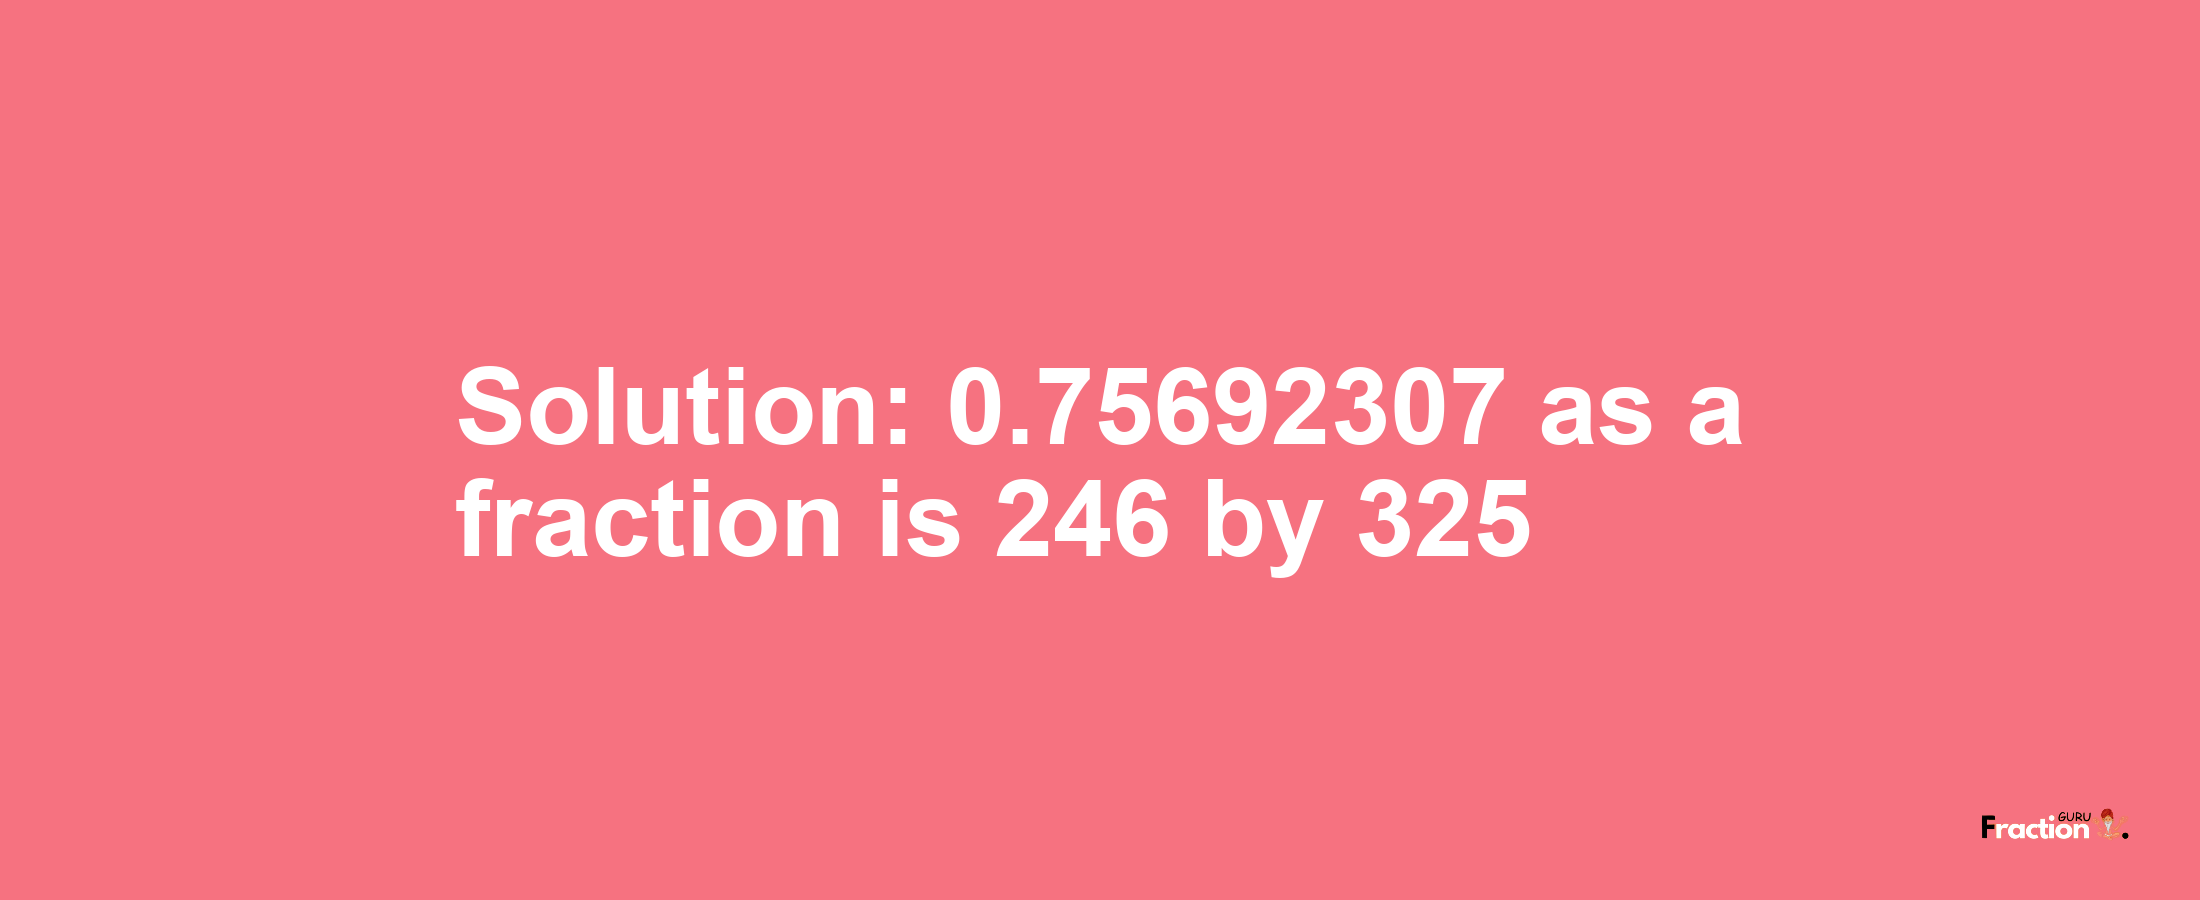 Solution:0.75692307 as a fraction is 246/325